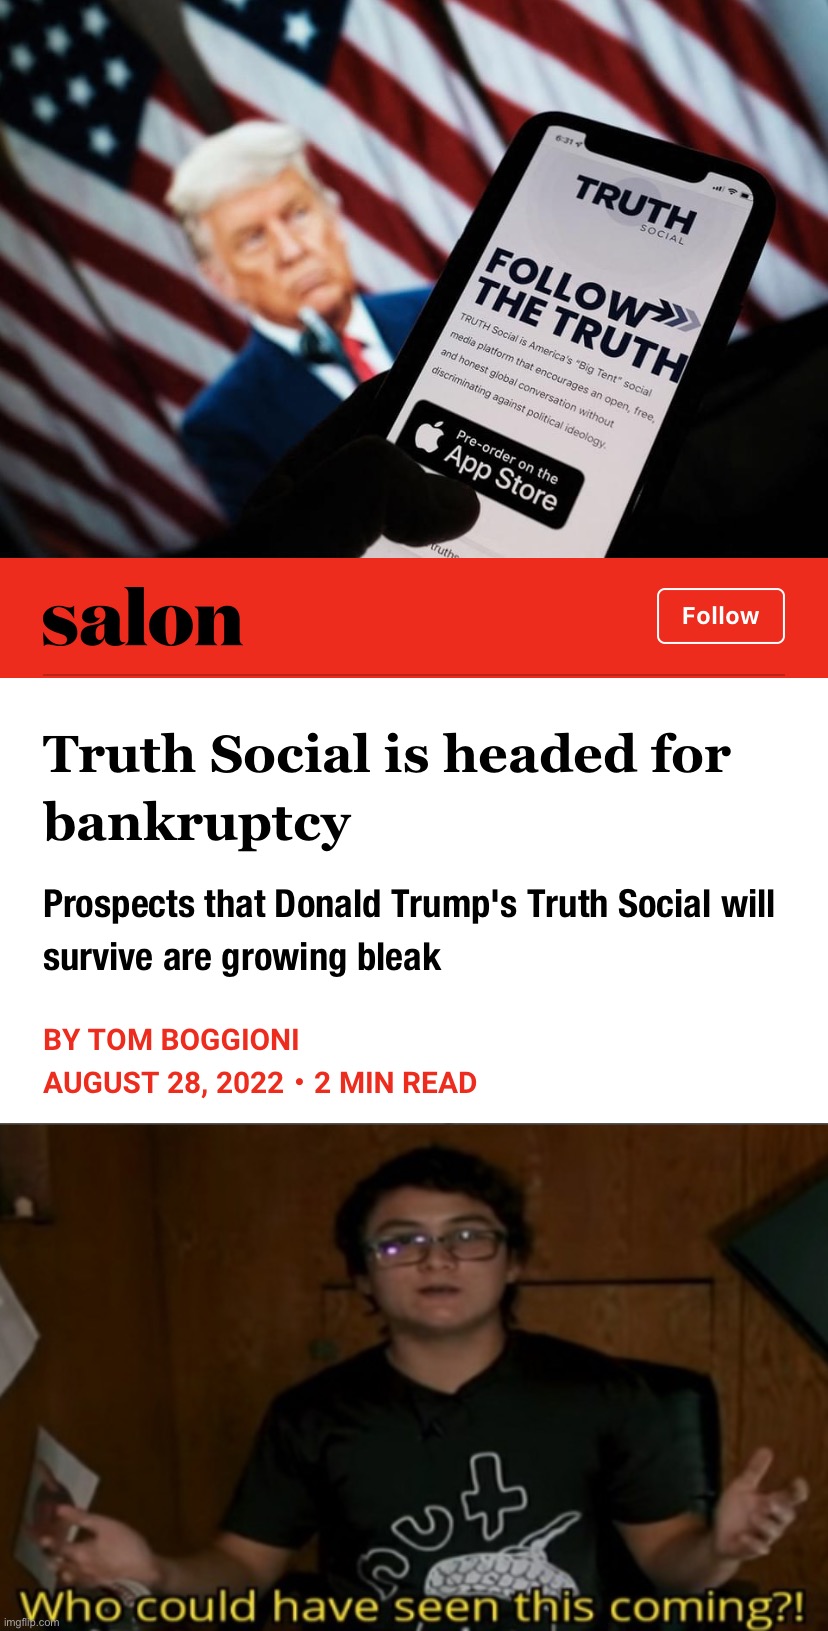 Man, that’s crazy | image tagged in truth social is headed for bankruptcy,who could have seen this coming,truth social,bankruptcy,trump is a moron,social media | made w/ Imgflip meme maker